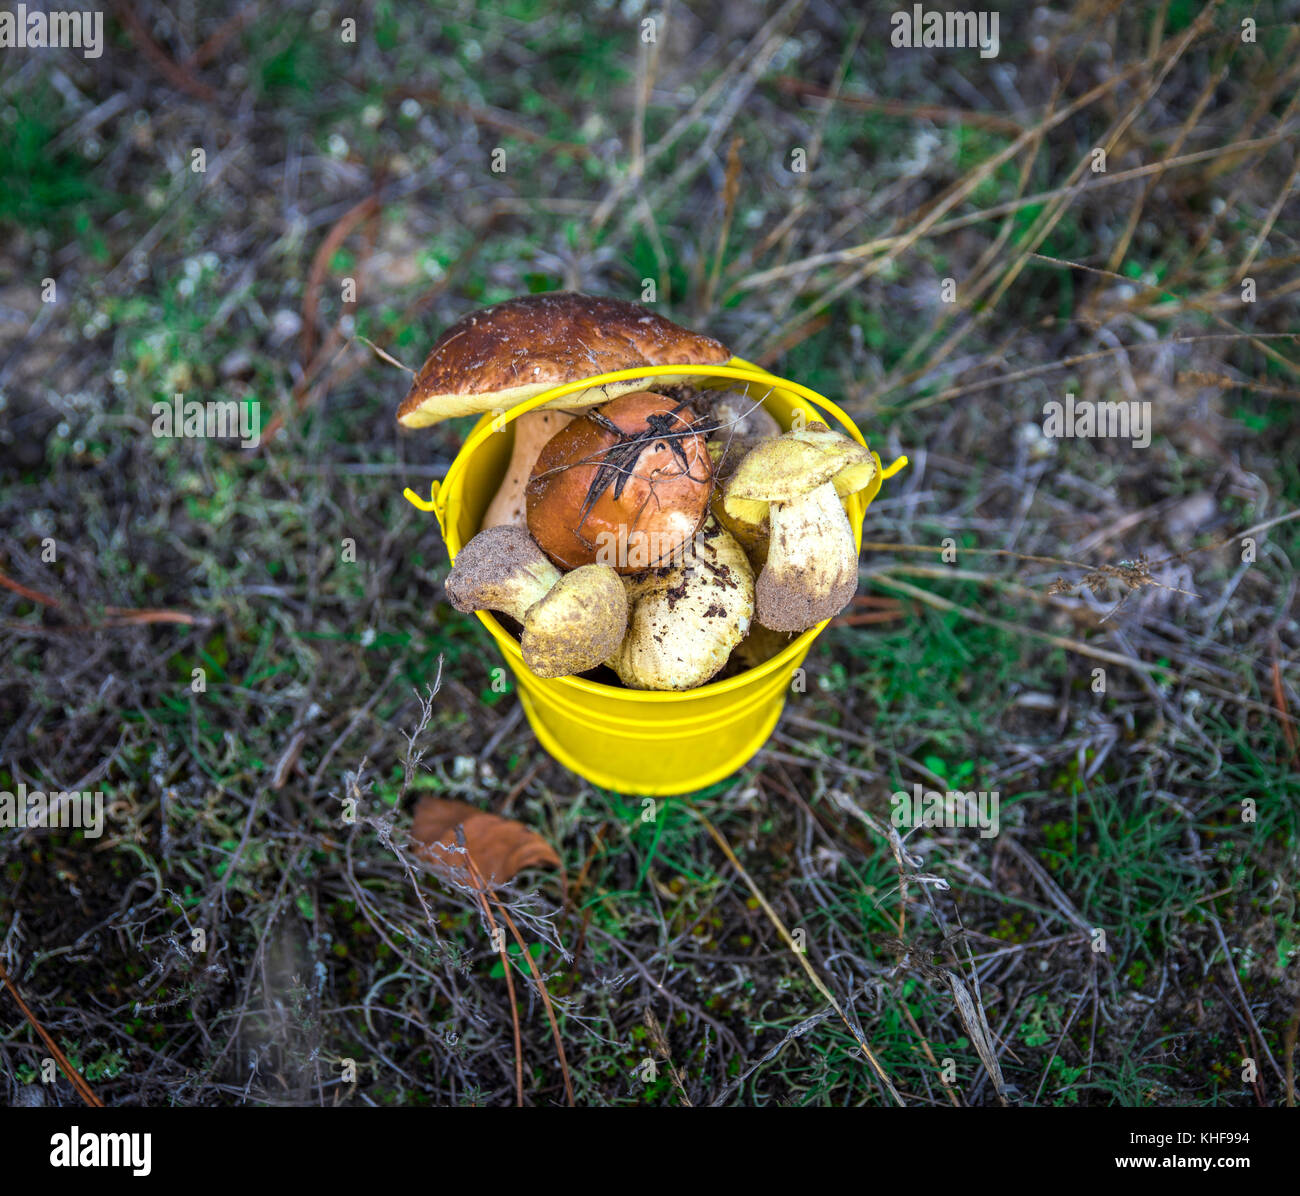 fresh edible wild mushrooms in a yellow bucket on a clearing, top view Stock Photo